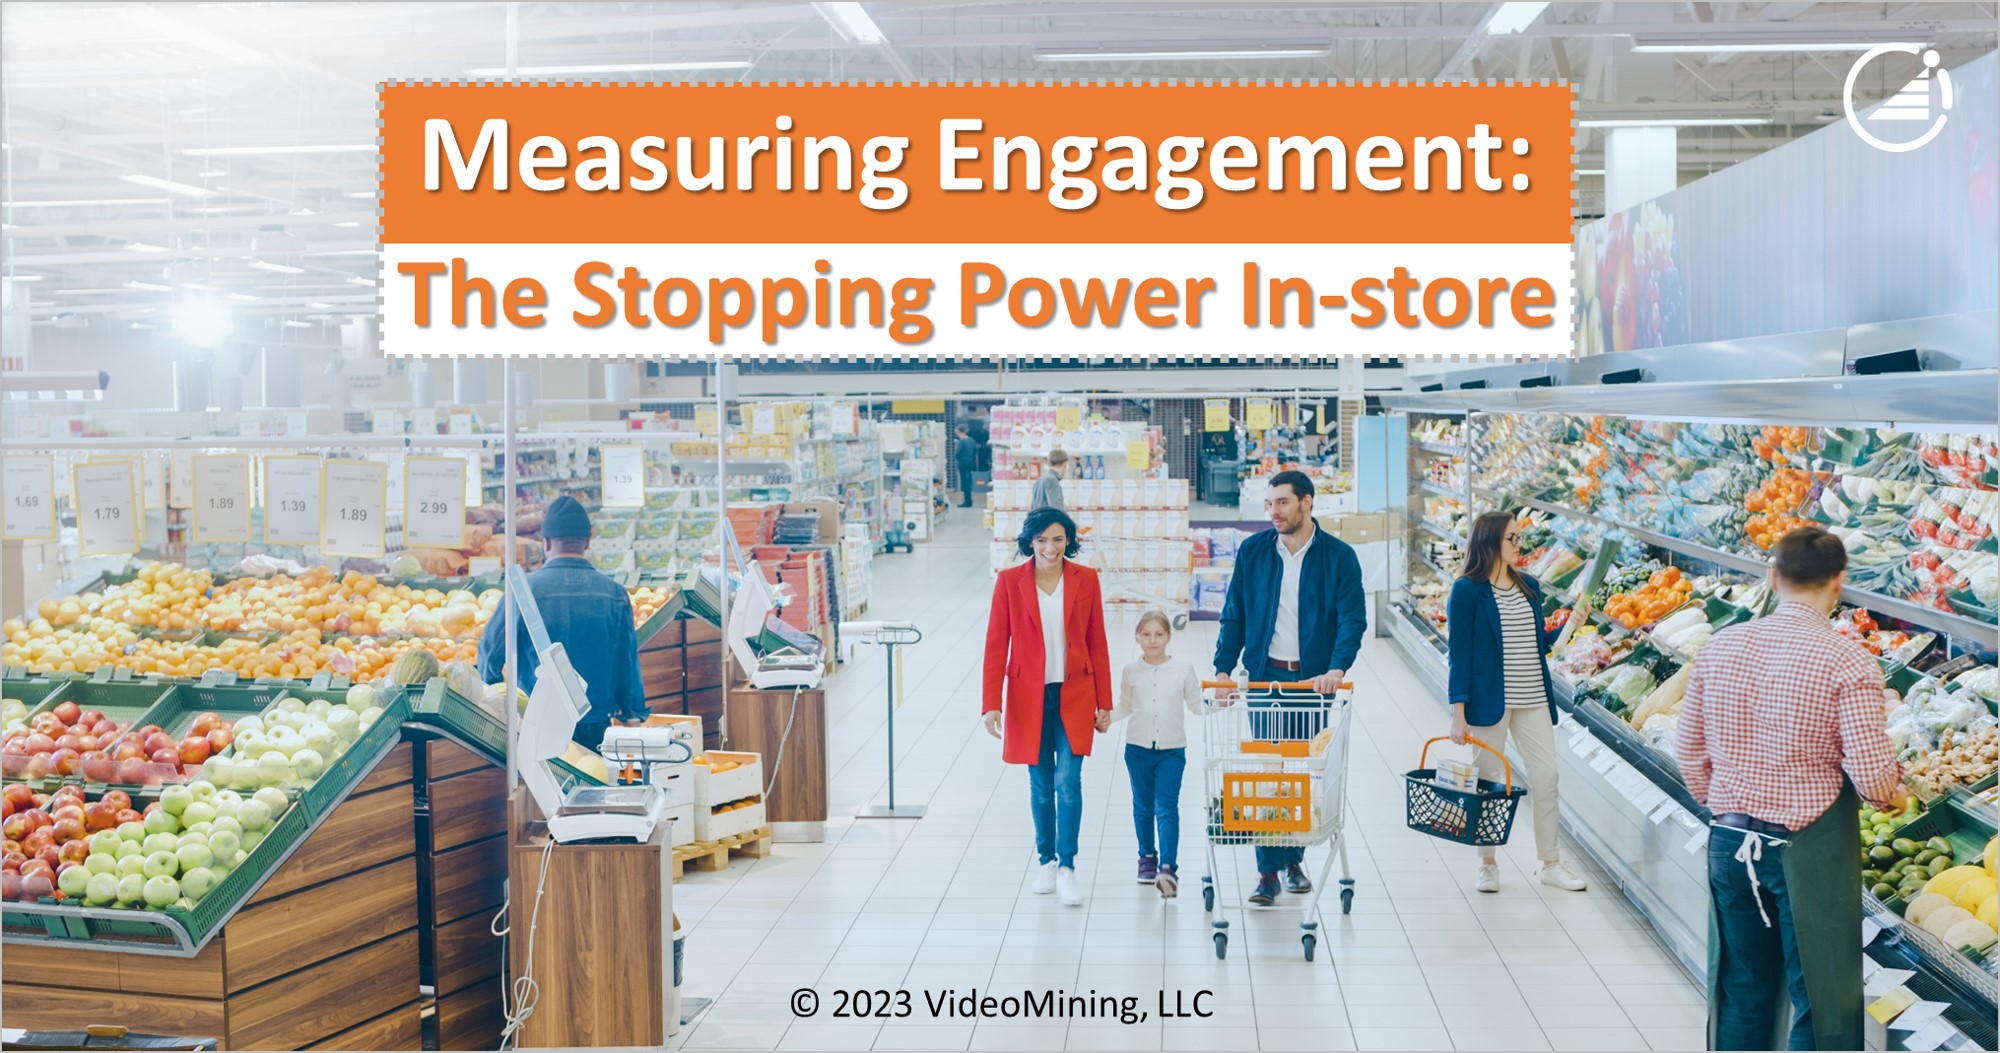 Measuring Engagement: The Stopping Power In-store